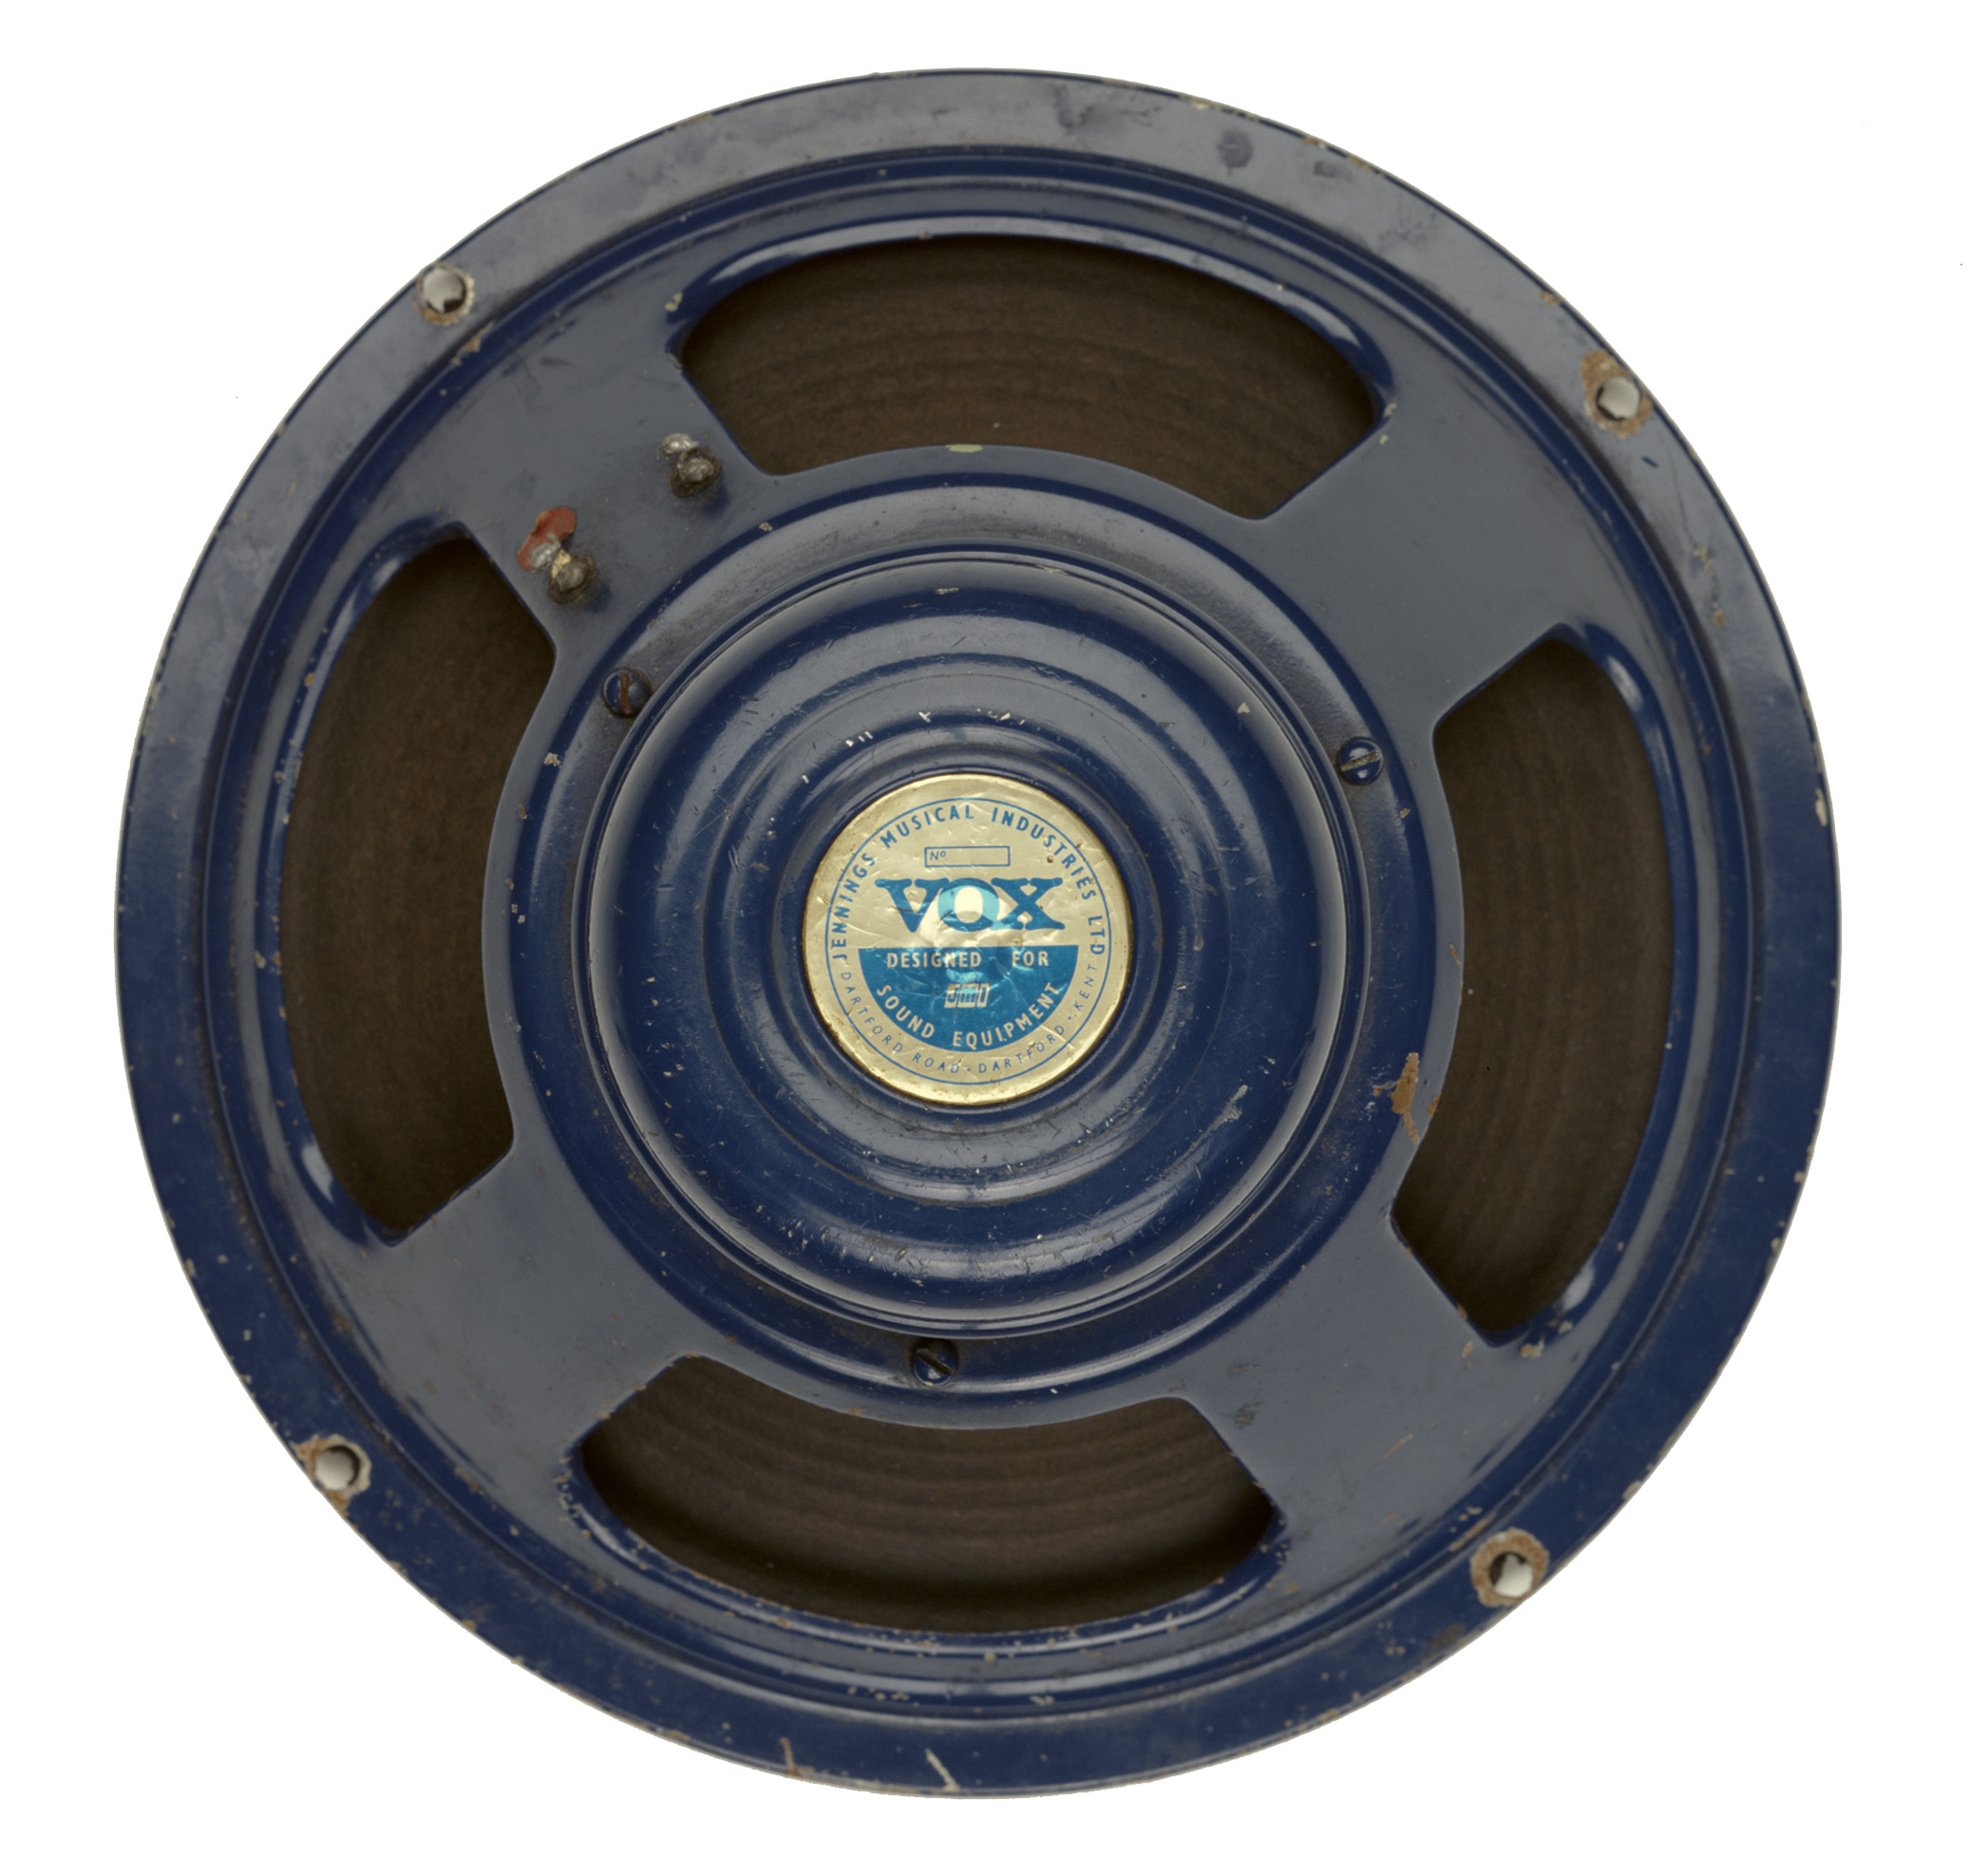 An early example of a  Vox Blue